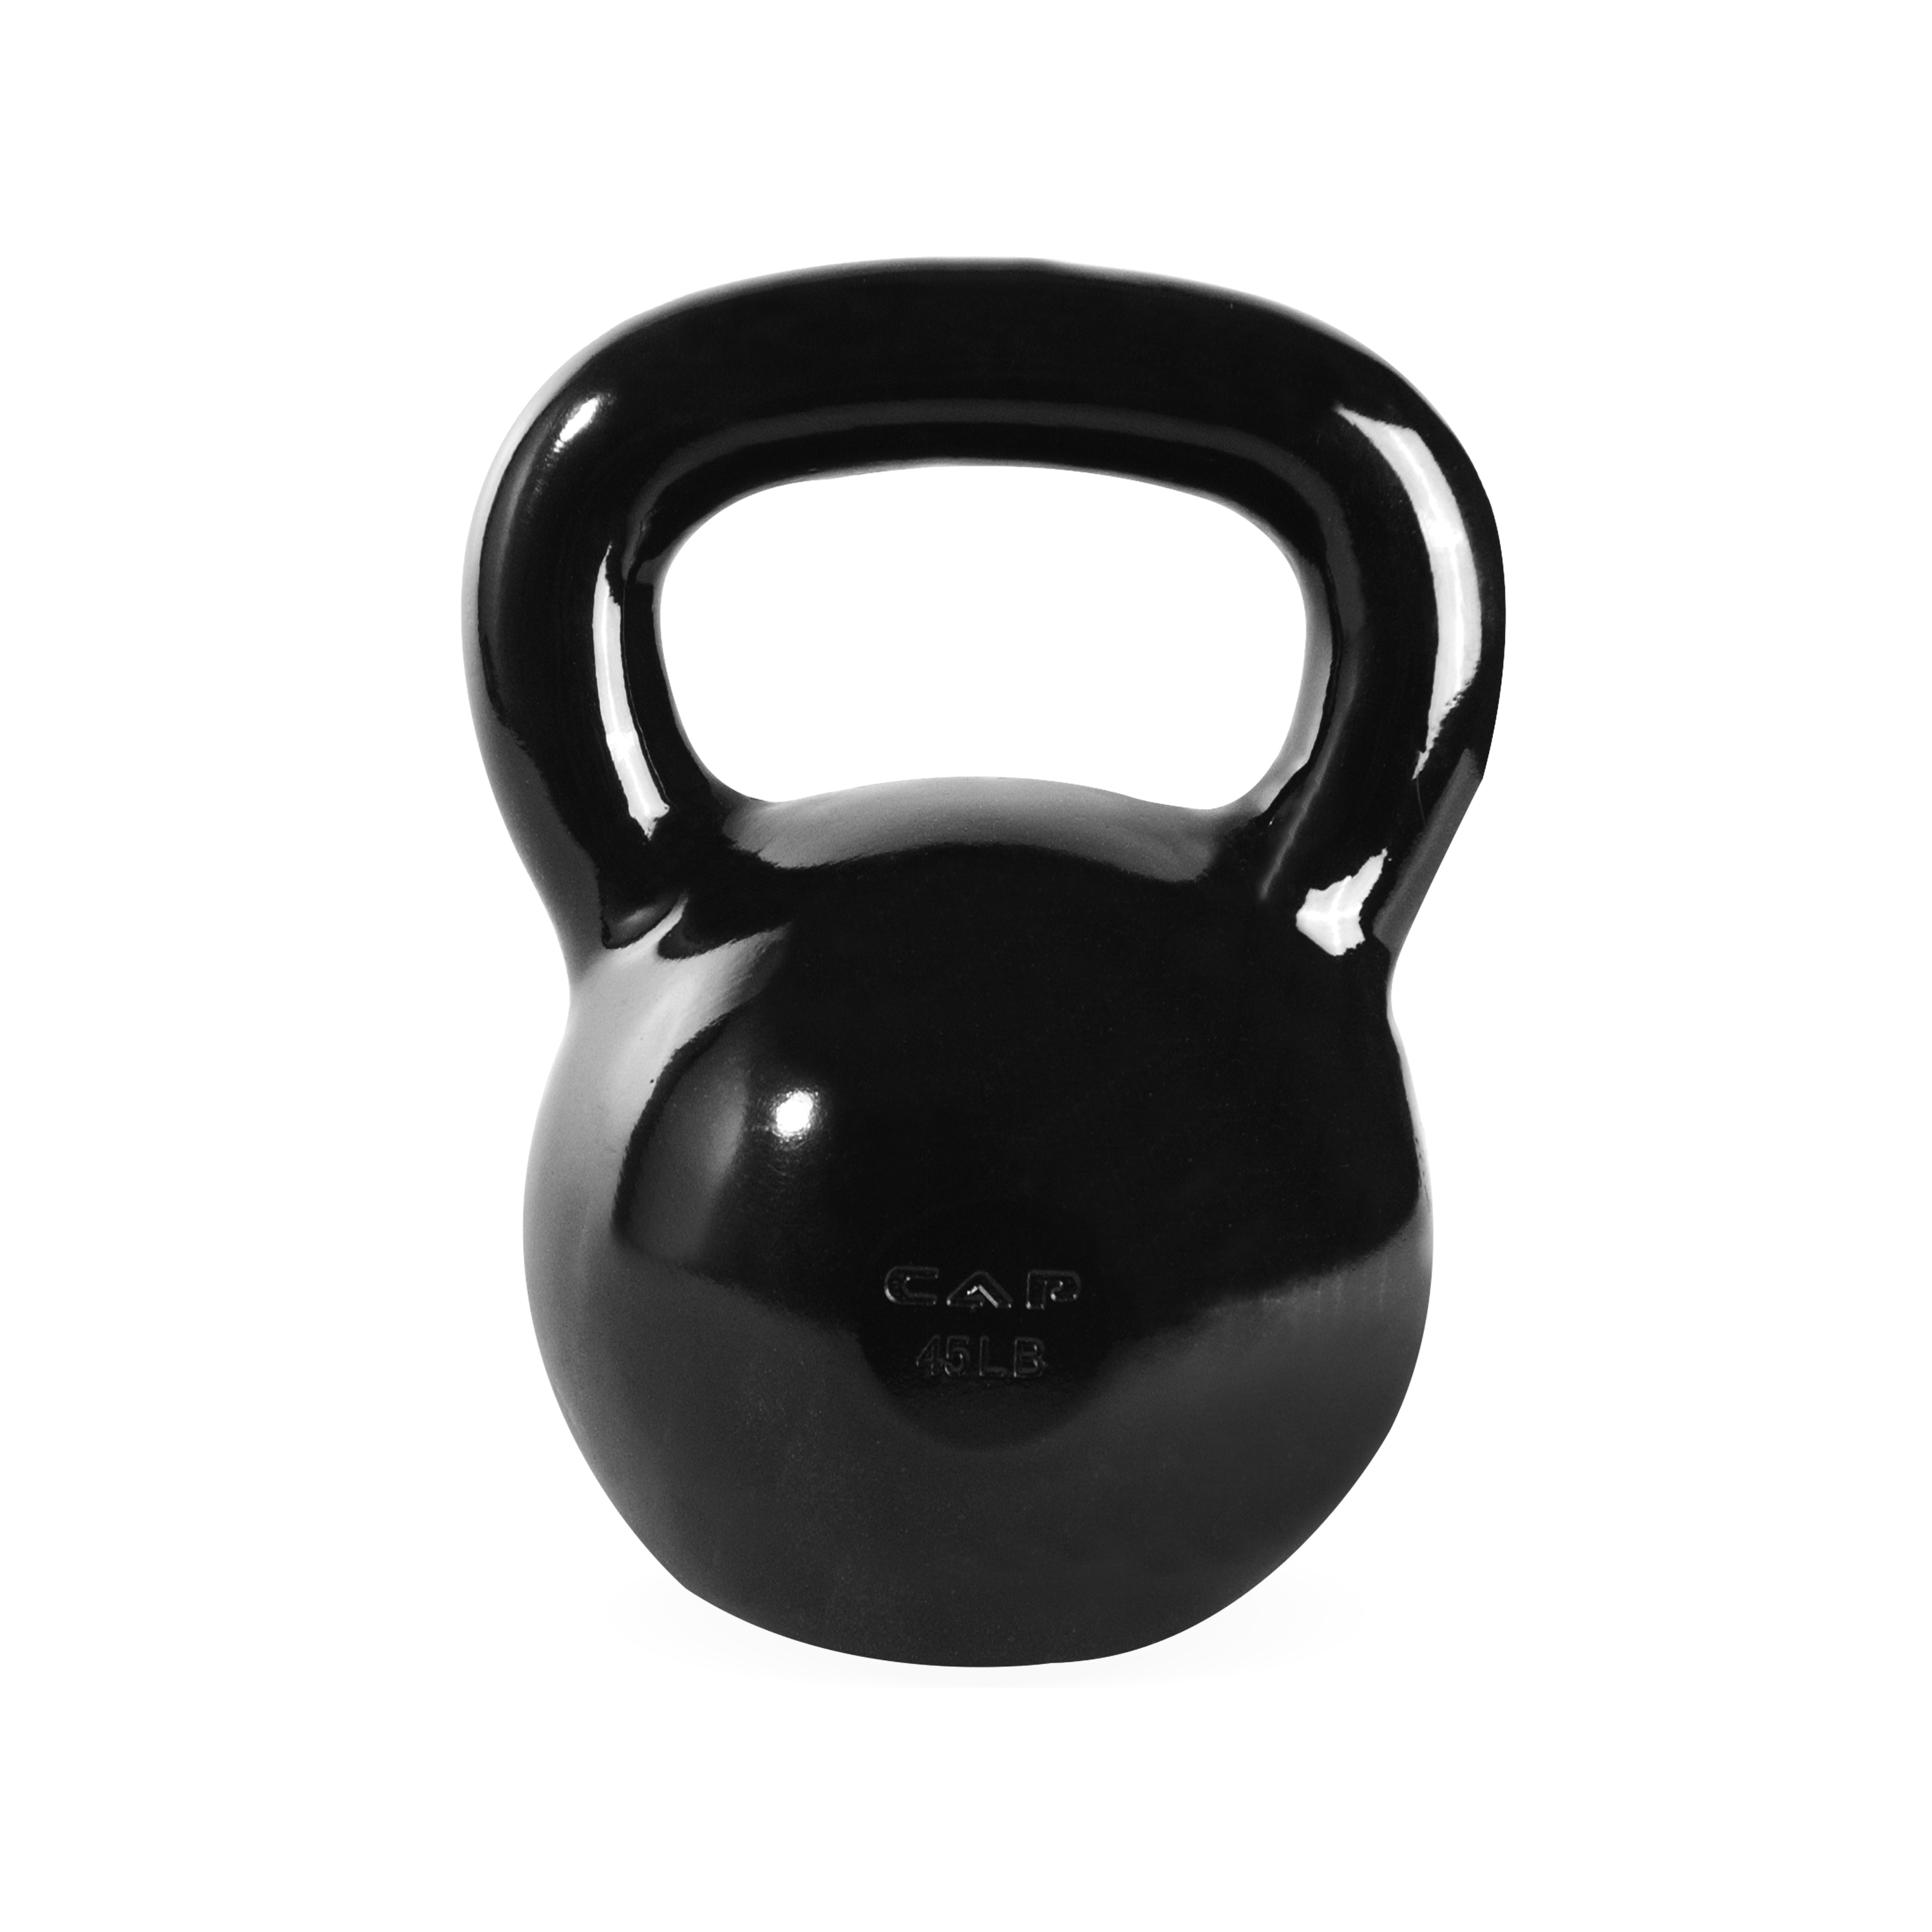 CAP Barbell Cast Iron Kettlebell, Black 45LBS - image 5 of 8